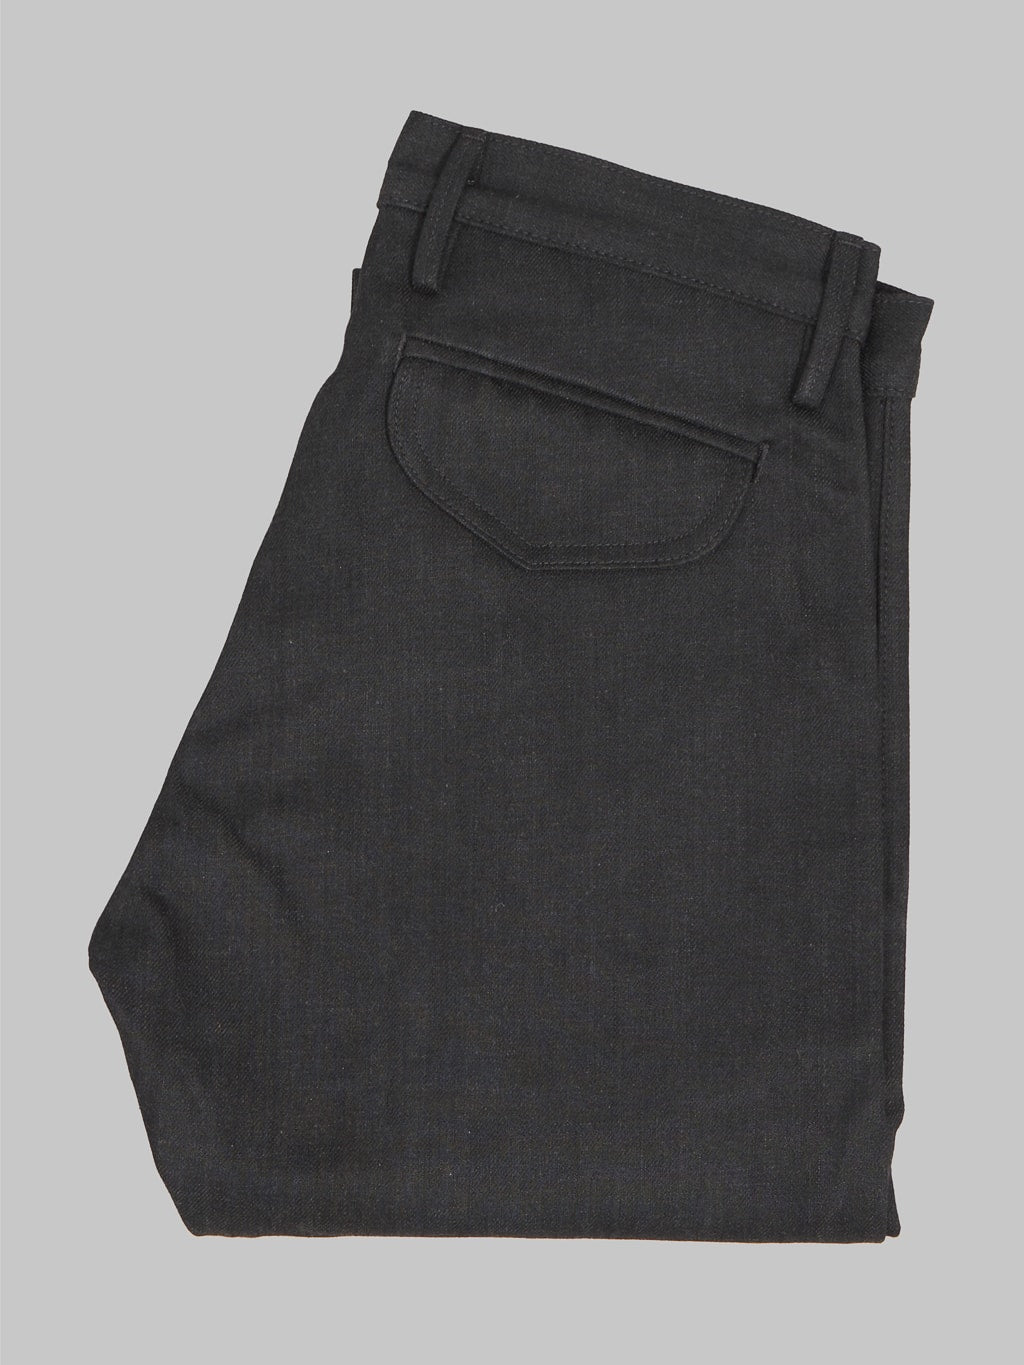 rogue territory 15oz officer trousers stealth slim tapered handmade in Los Angeles